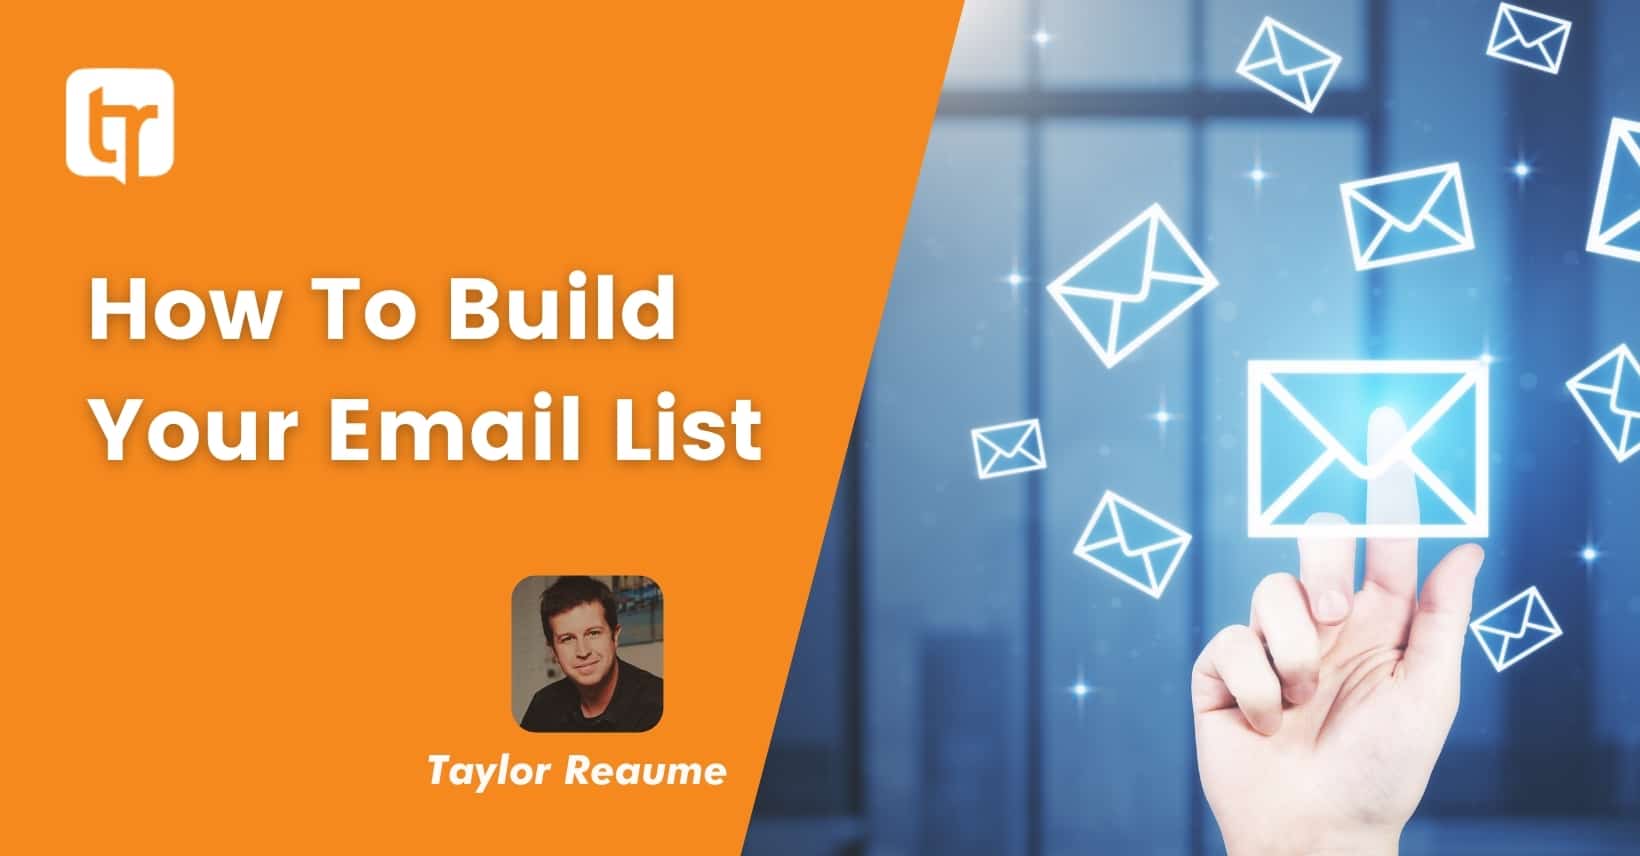 Email marketing requires an email list. Email list-building requires email marketing automation strategy. Get email campaign list building ideas.